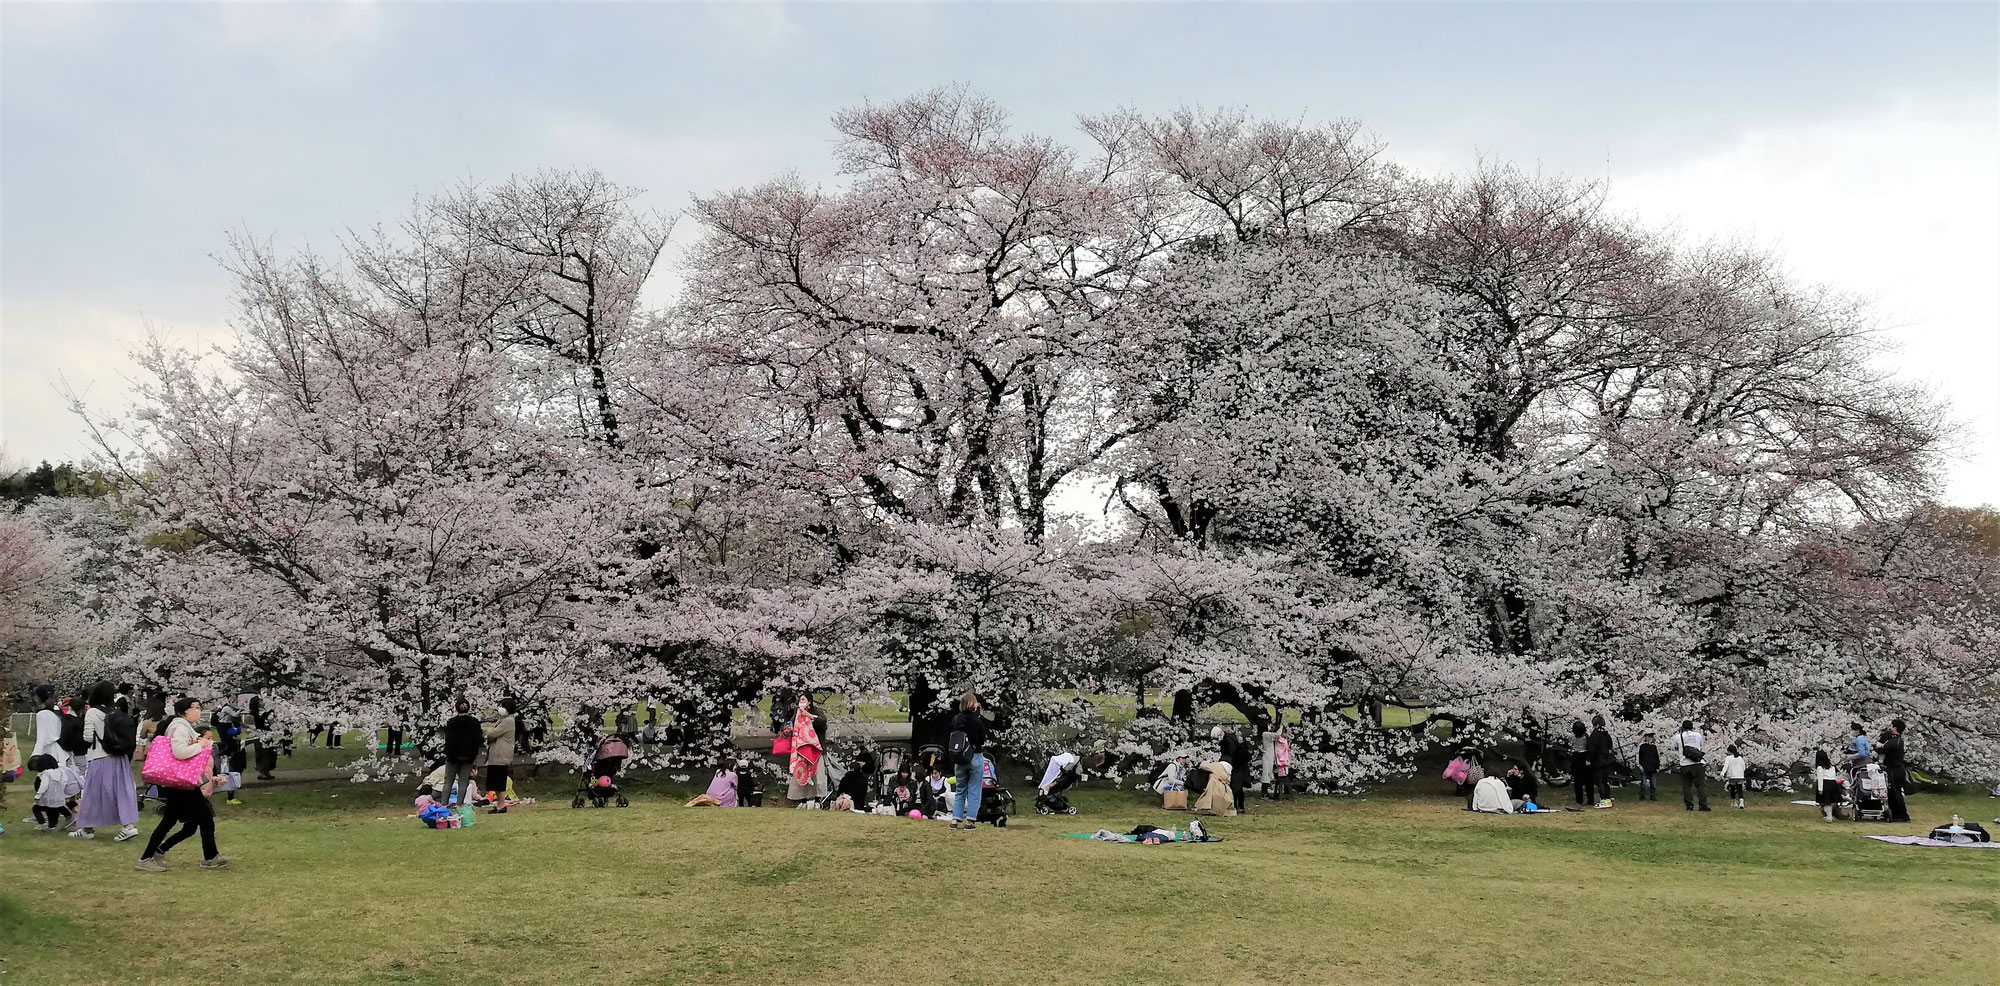 Cherry blossom culture for Japanese people, part I